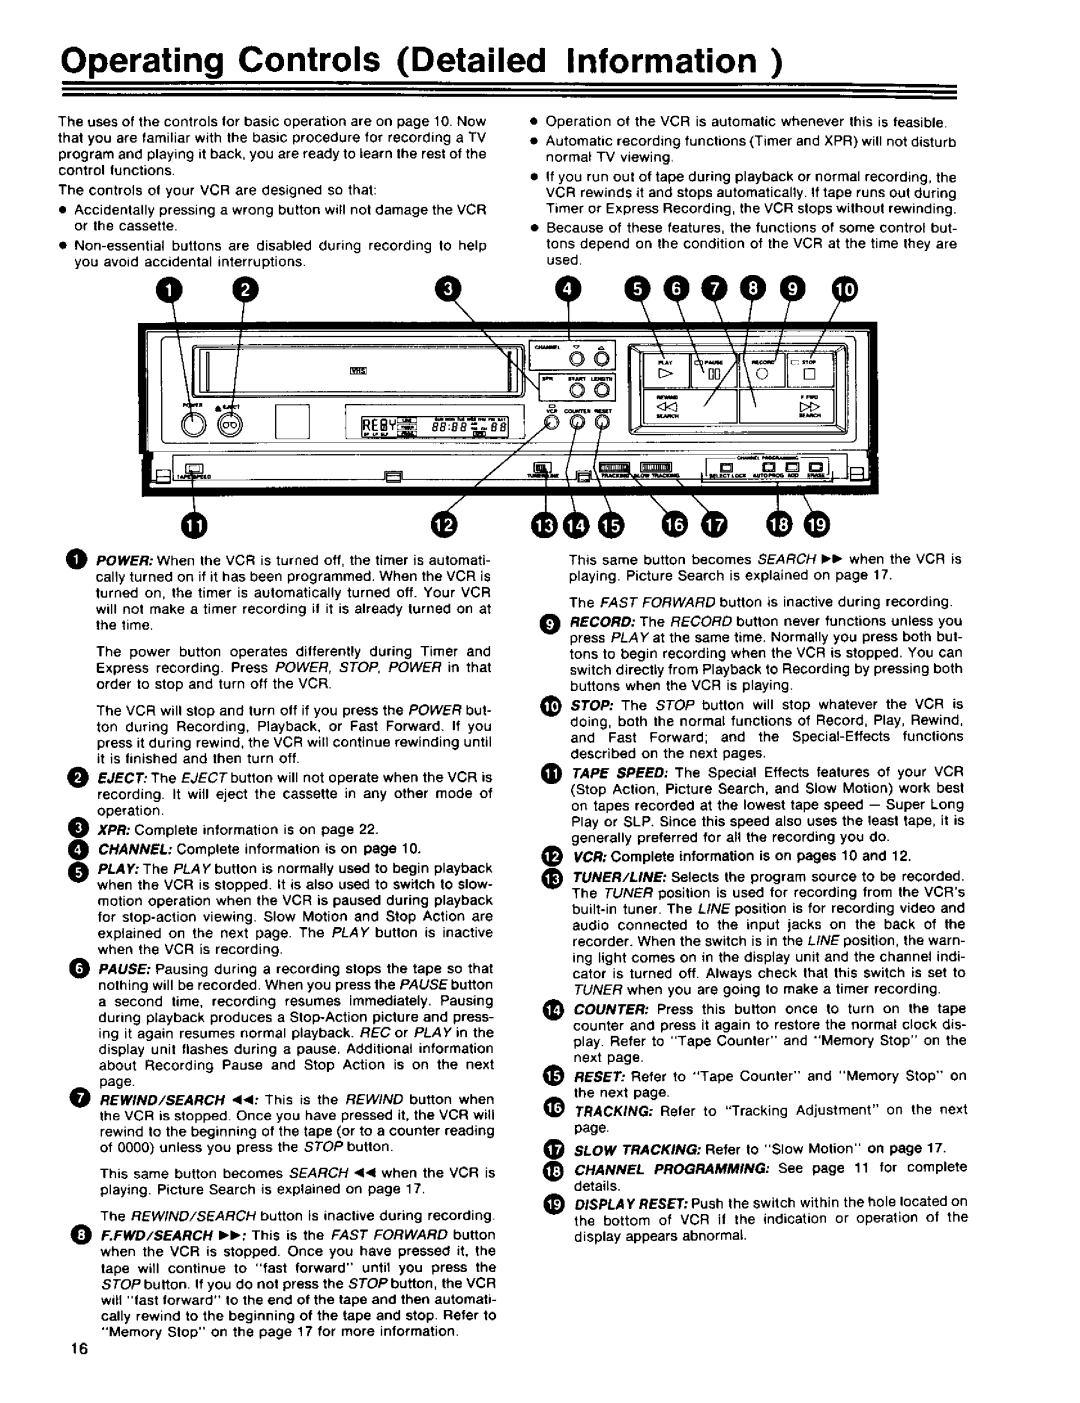 RCA 390 owner manual Operating Controls Detailed Information, Rewind/Search, VCR Complete information is on pages 10 and 